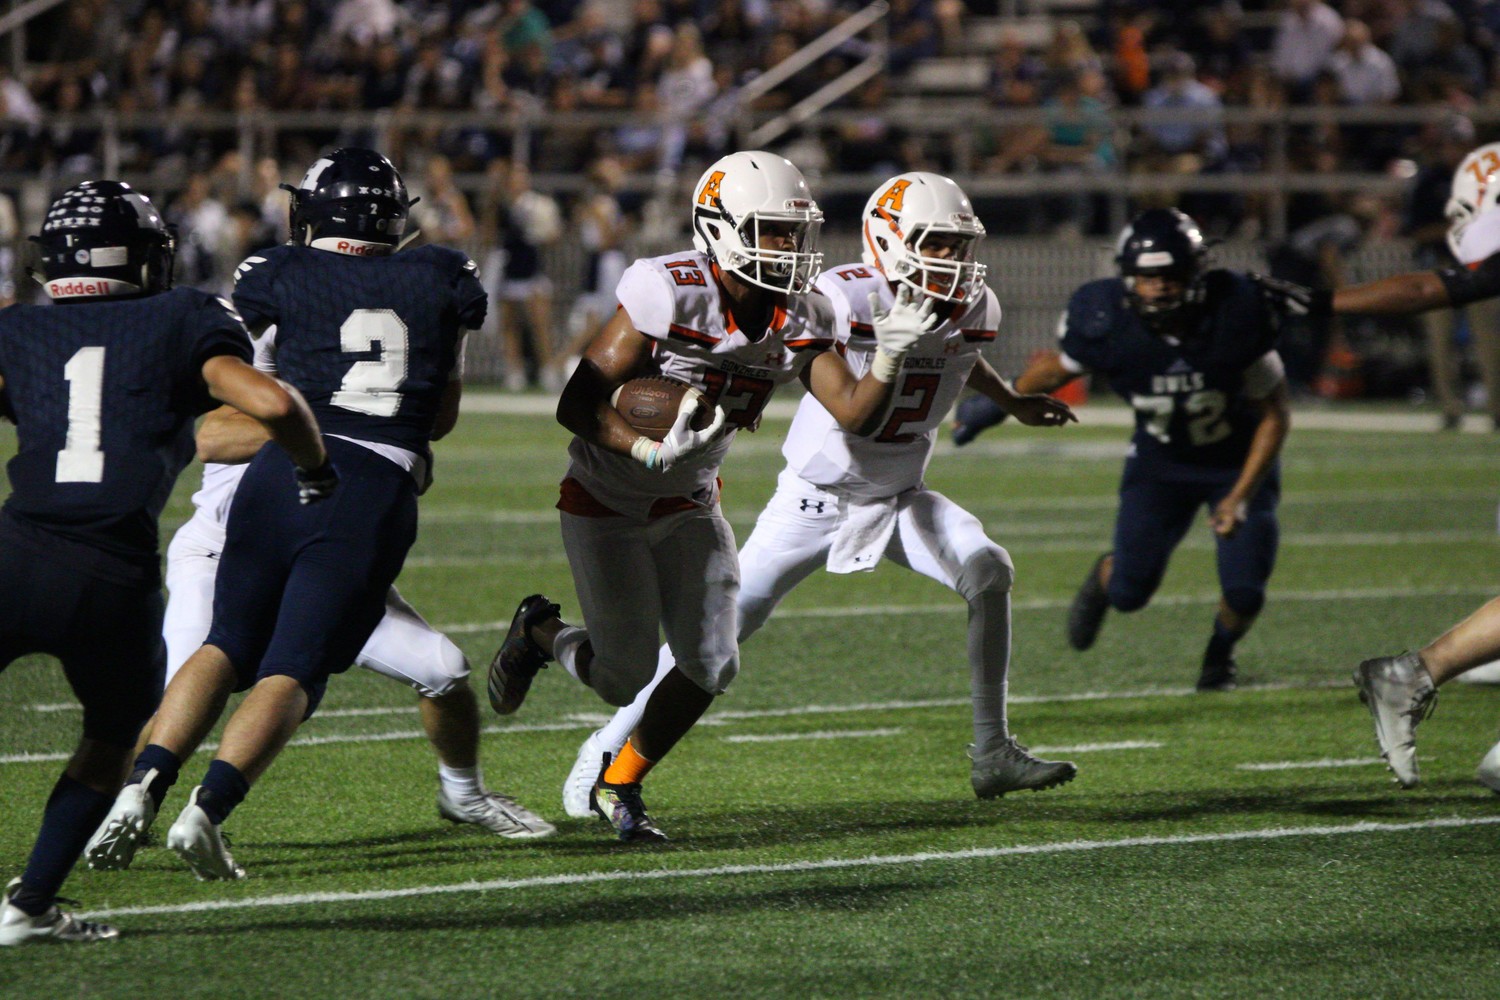 James Martinez (13) gets in the end zone for the Gonzales Apaches. Gonzales won 24-14 over Hondo